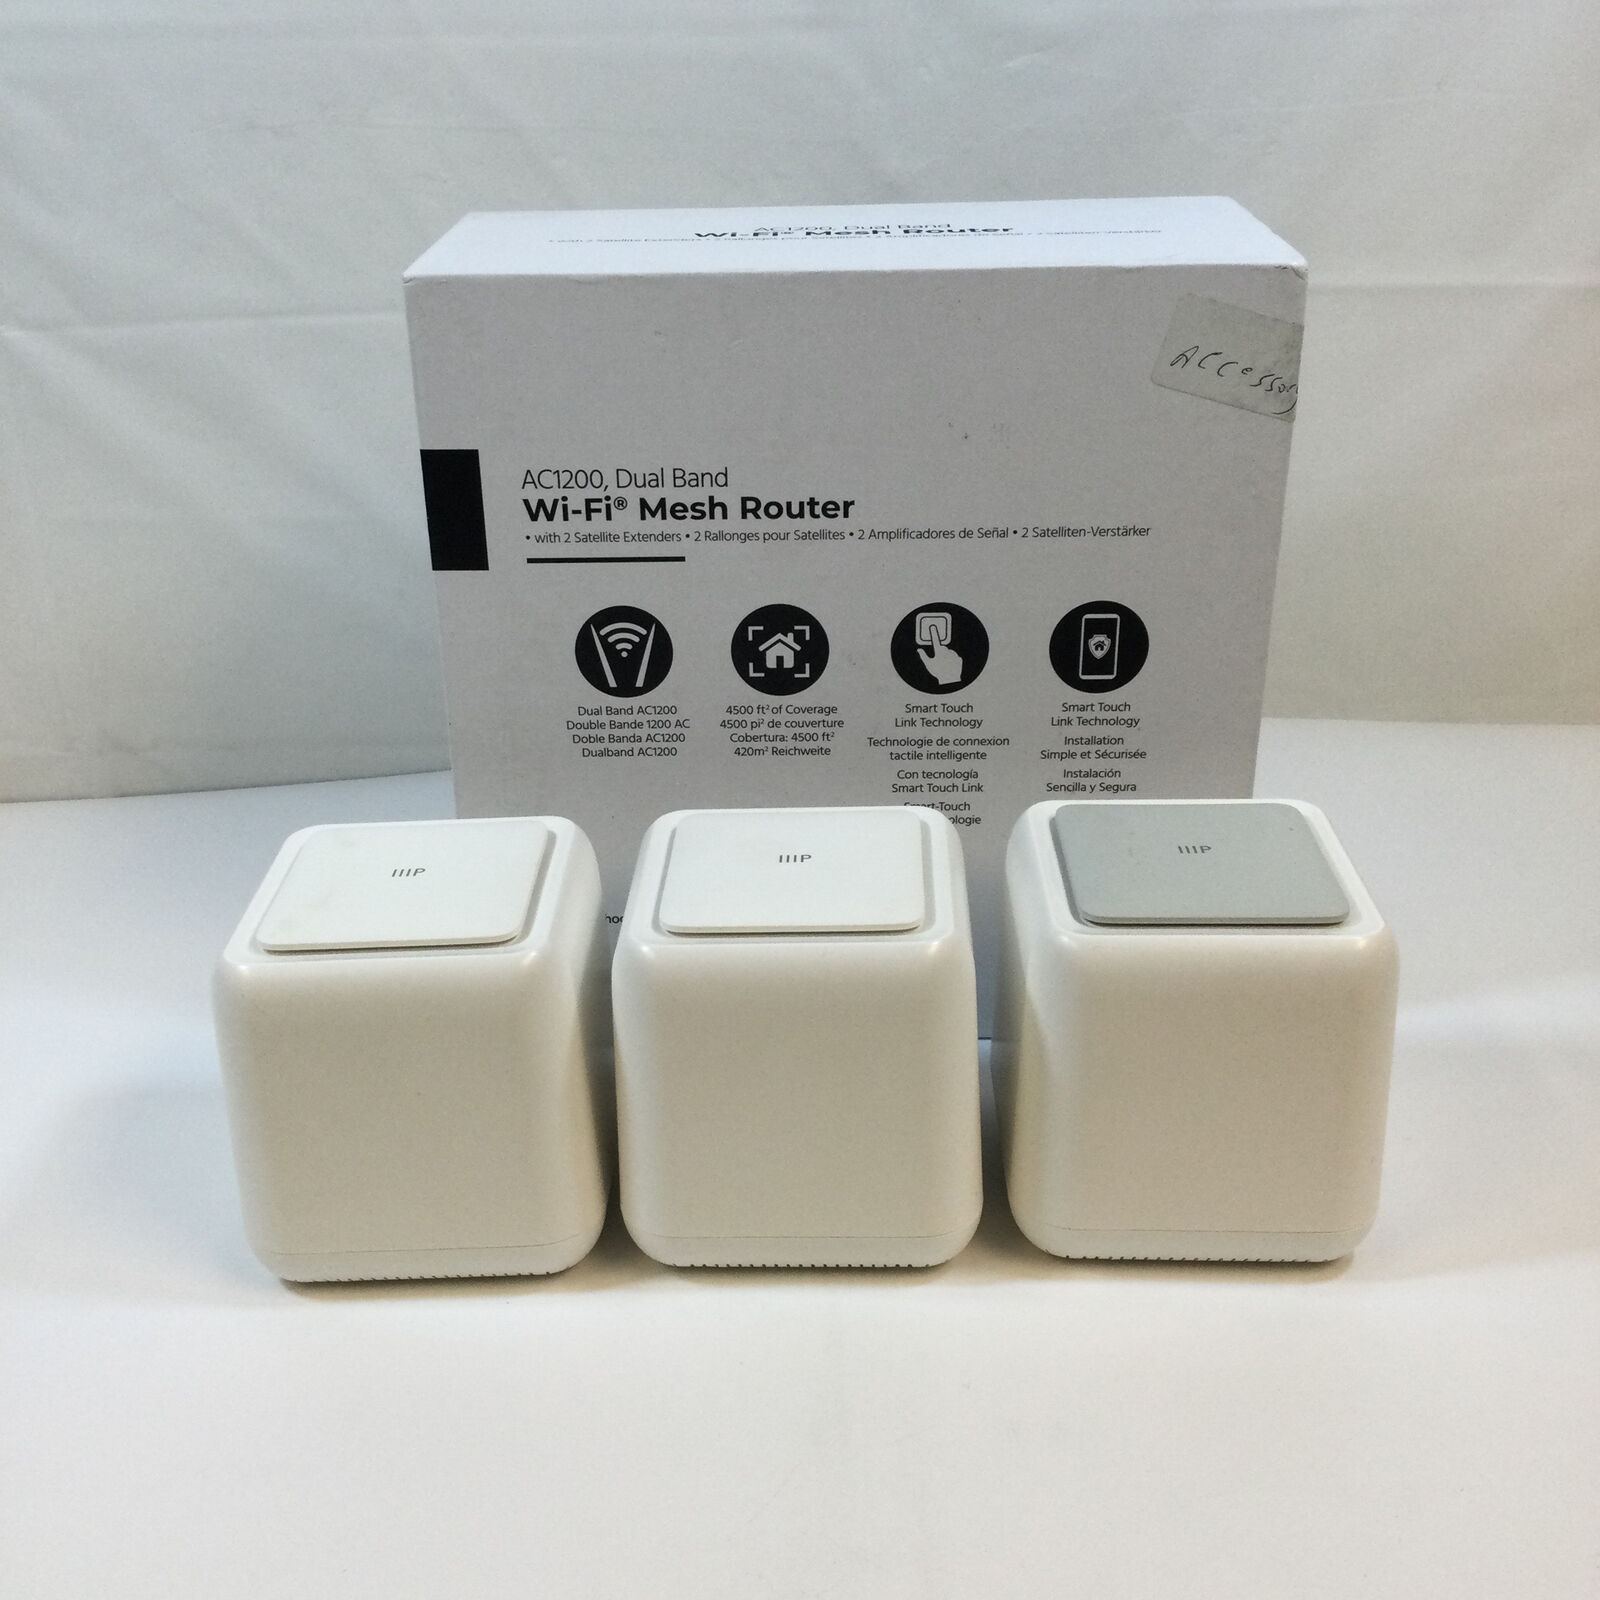 Monoprice 38623 White AC1200 Dual Band WiFi Mesh Router System Pack Of 3 Used